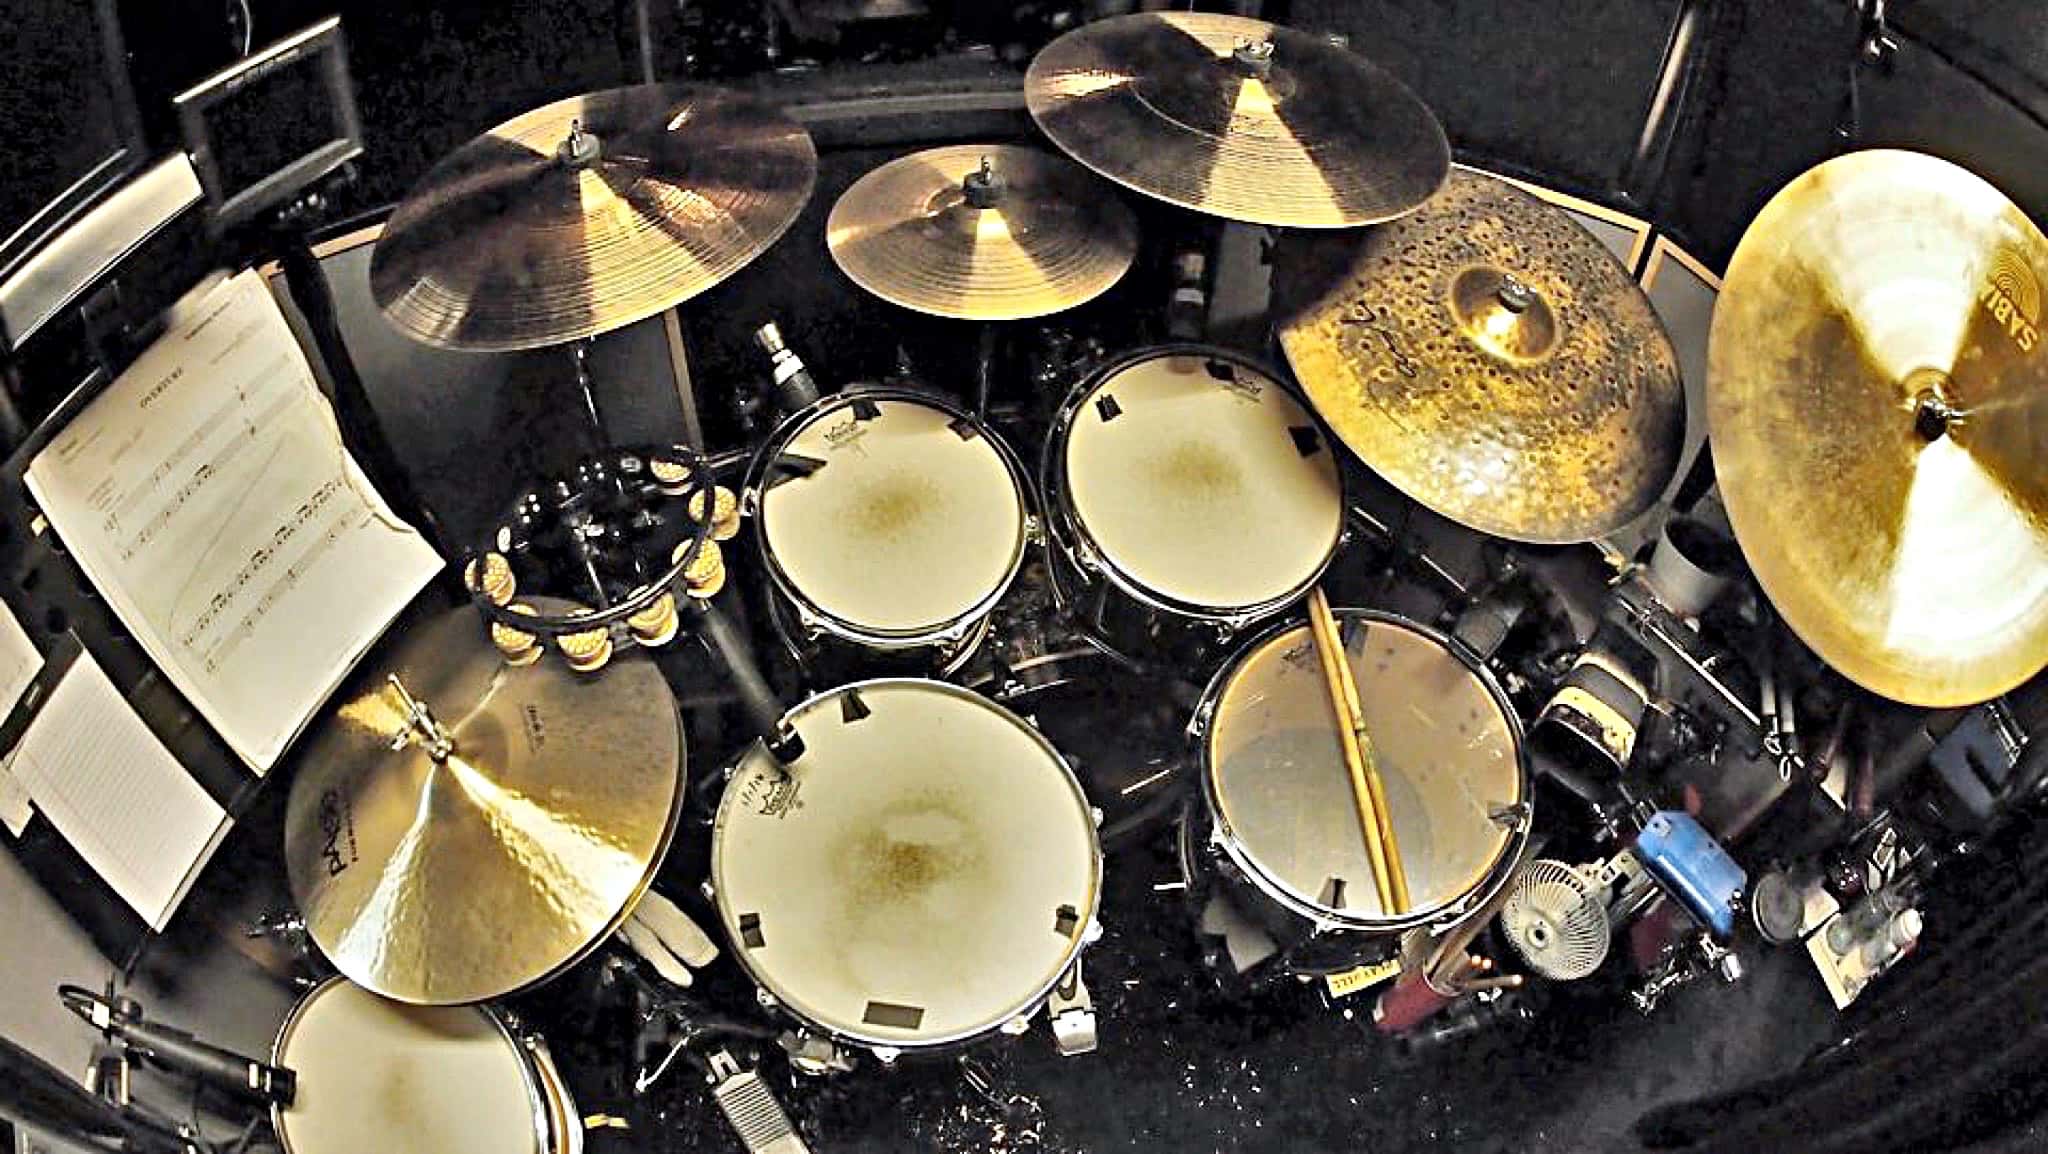 Perry Cavari's drum set setup for the Broadway production of Something Rotten at the St James Theatre.